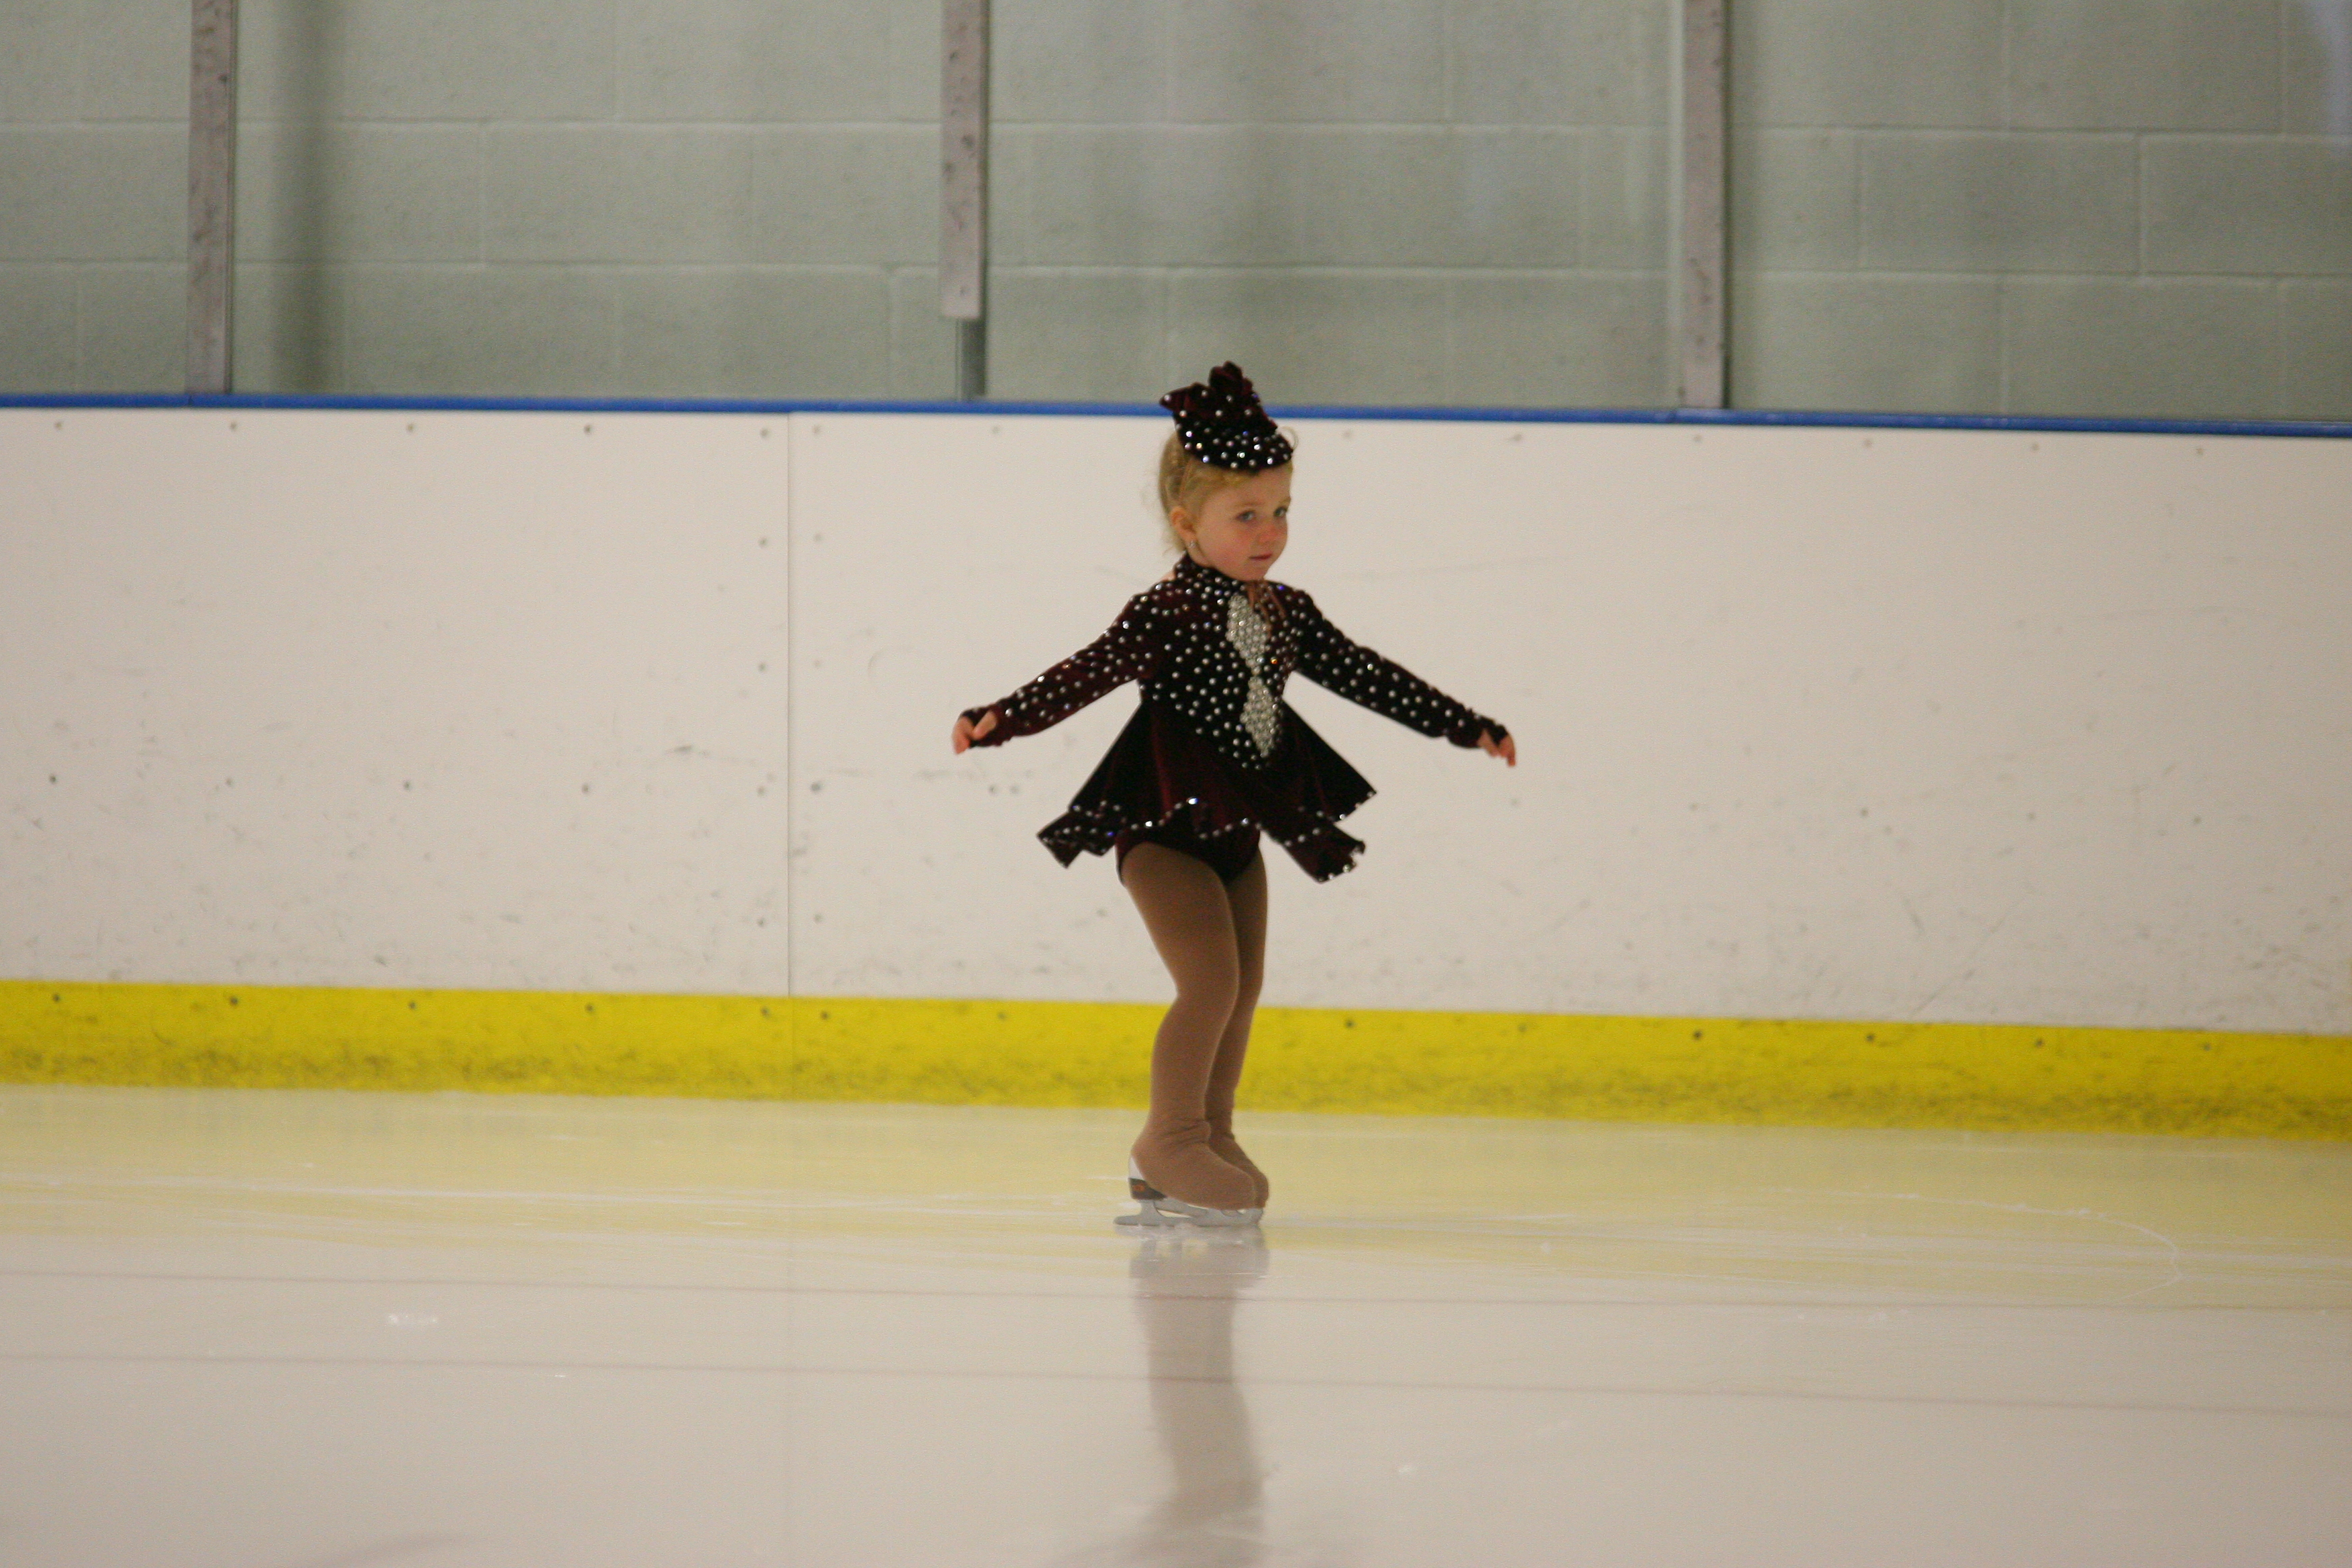 02/17/2012 Figure Skating Competition in Anaheim. Rosanna Won 1st Place Medal. Costume custom-designed and custom-made by Oxana Foss